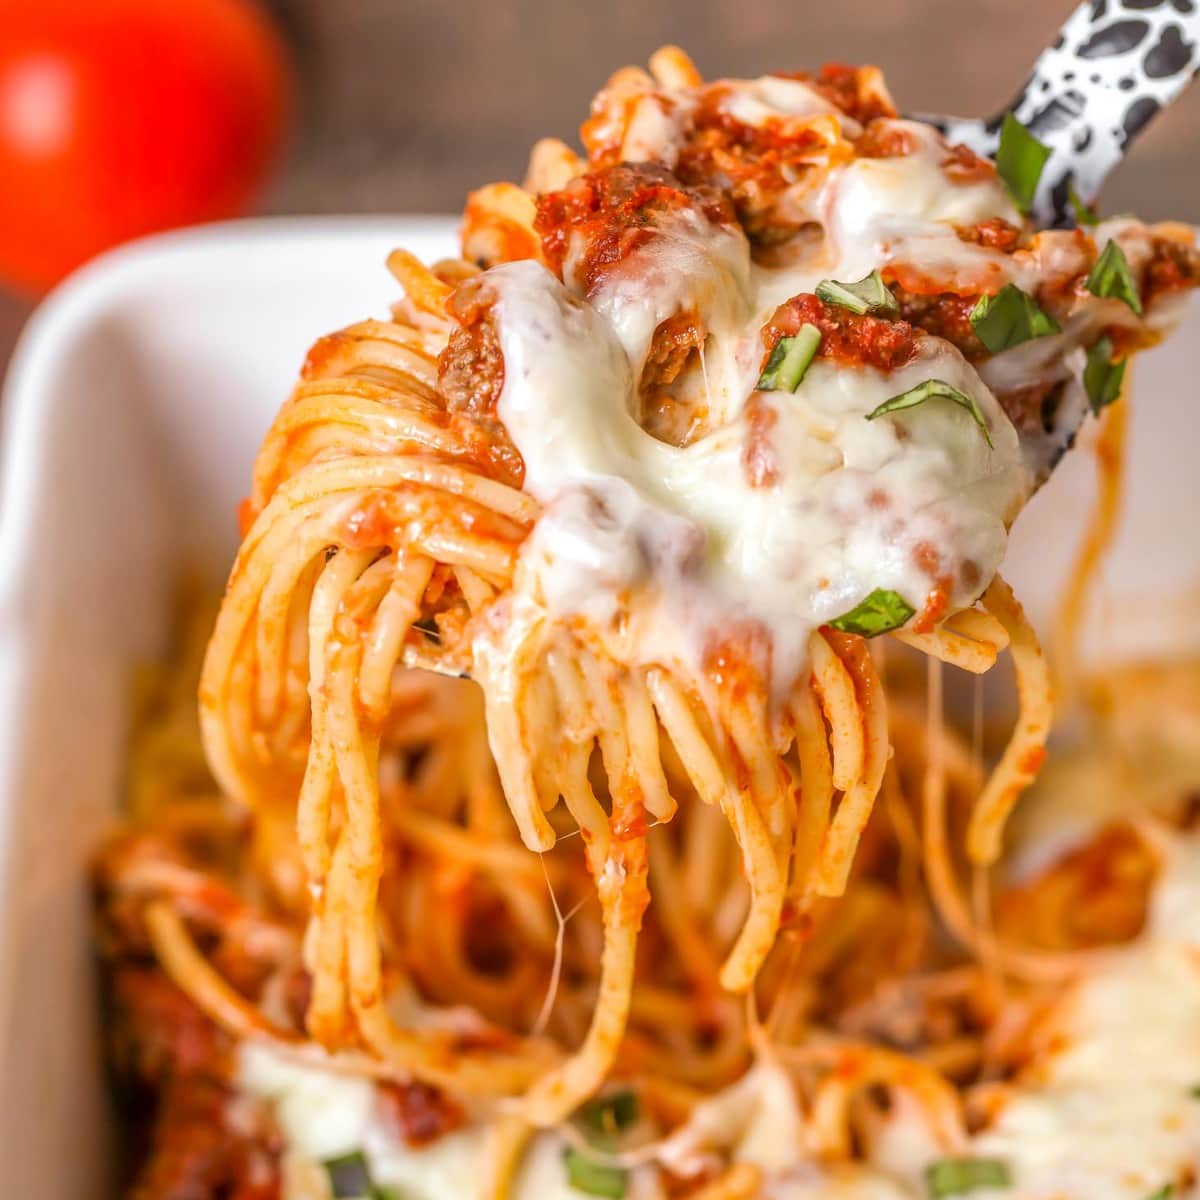 Vegetarian Pasta Recipes - A serving spoon scooping baked spaghetti out of a casserole dish.